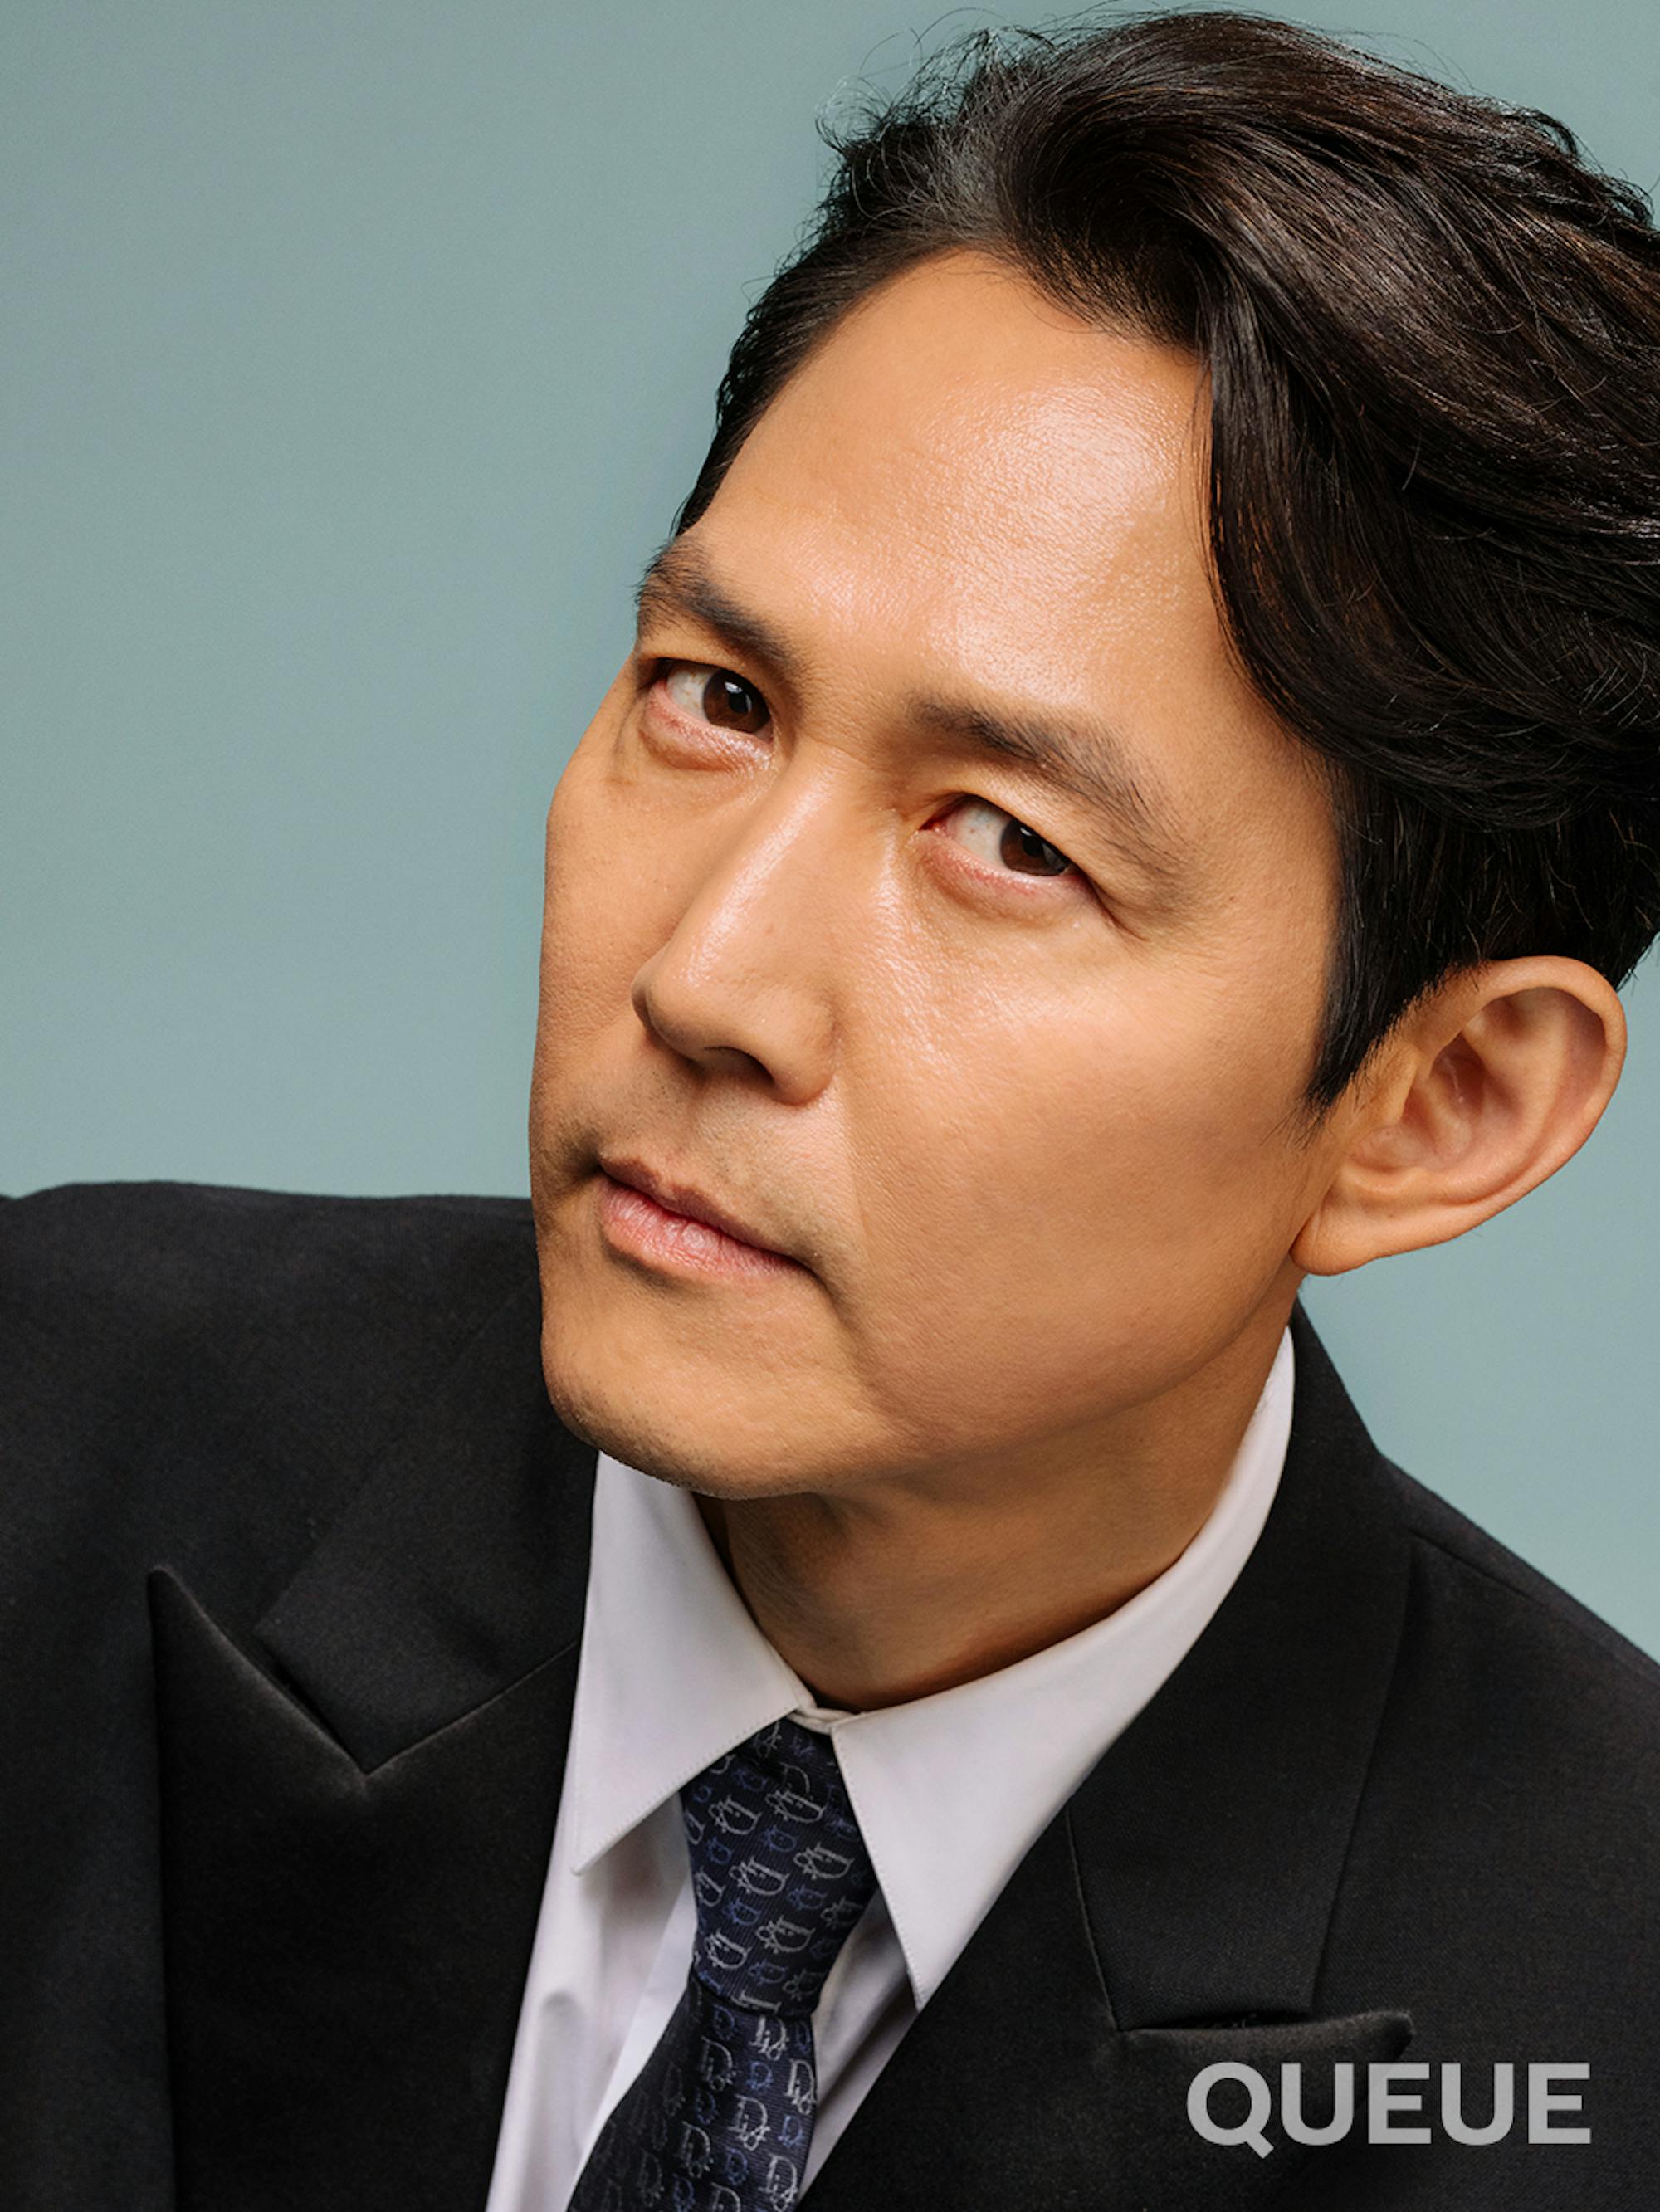 Lee Jung-jae in front of a gray-blue background looking stoic and sophisticated in a suit and tie.